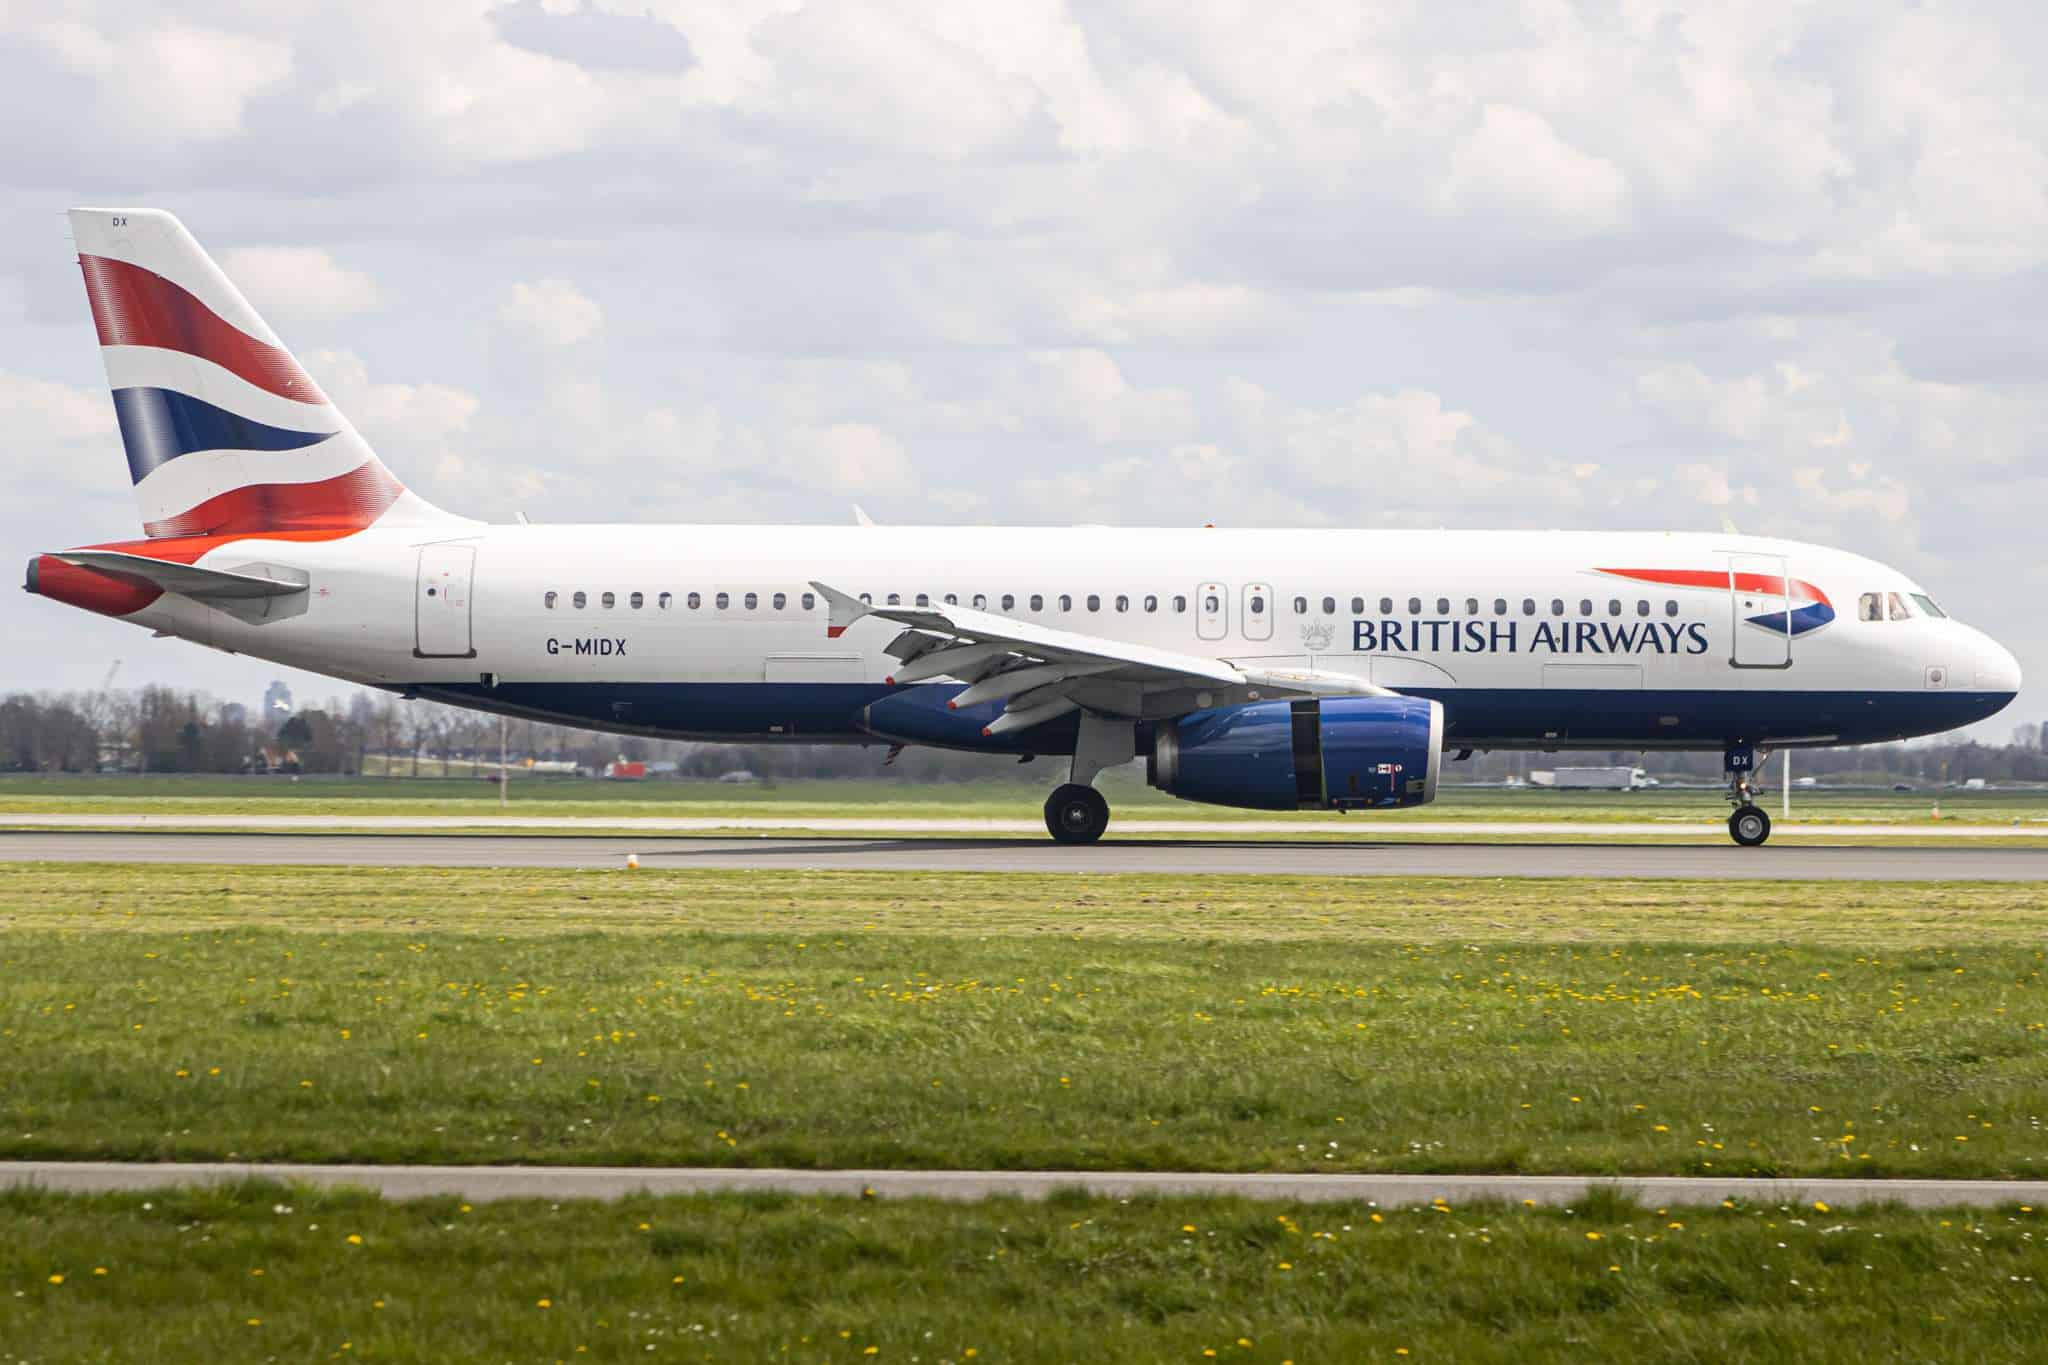 A British Airways flight performed an emergency landing upon arrival into London Heathrow, with the reason still being unknown at this time.